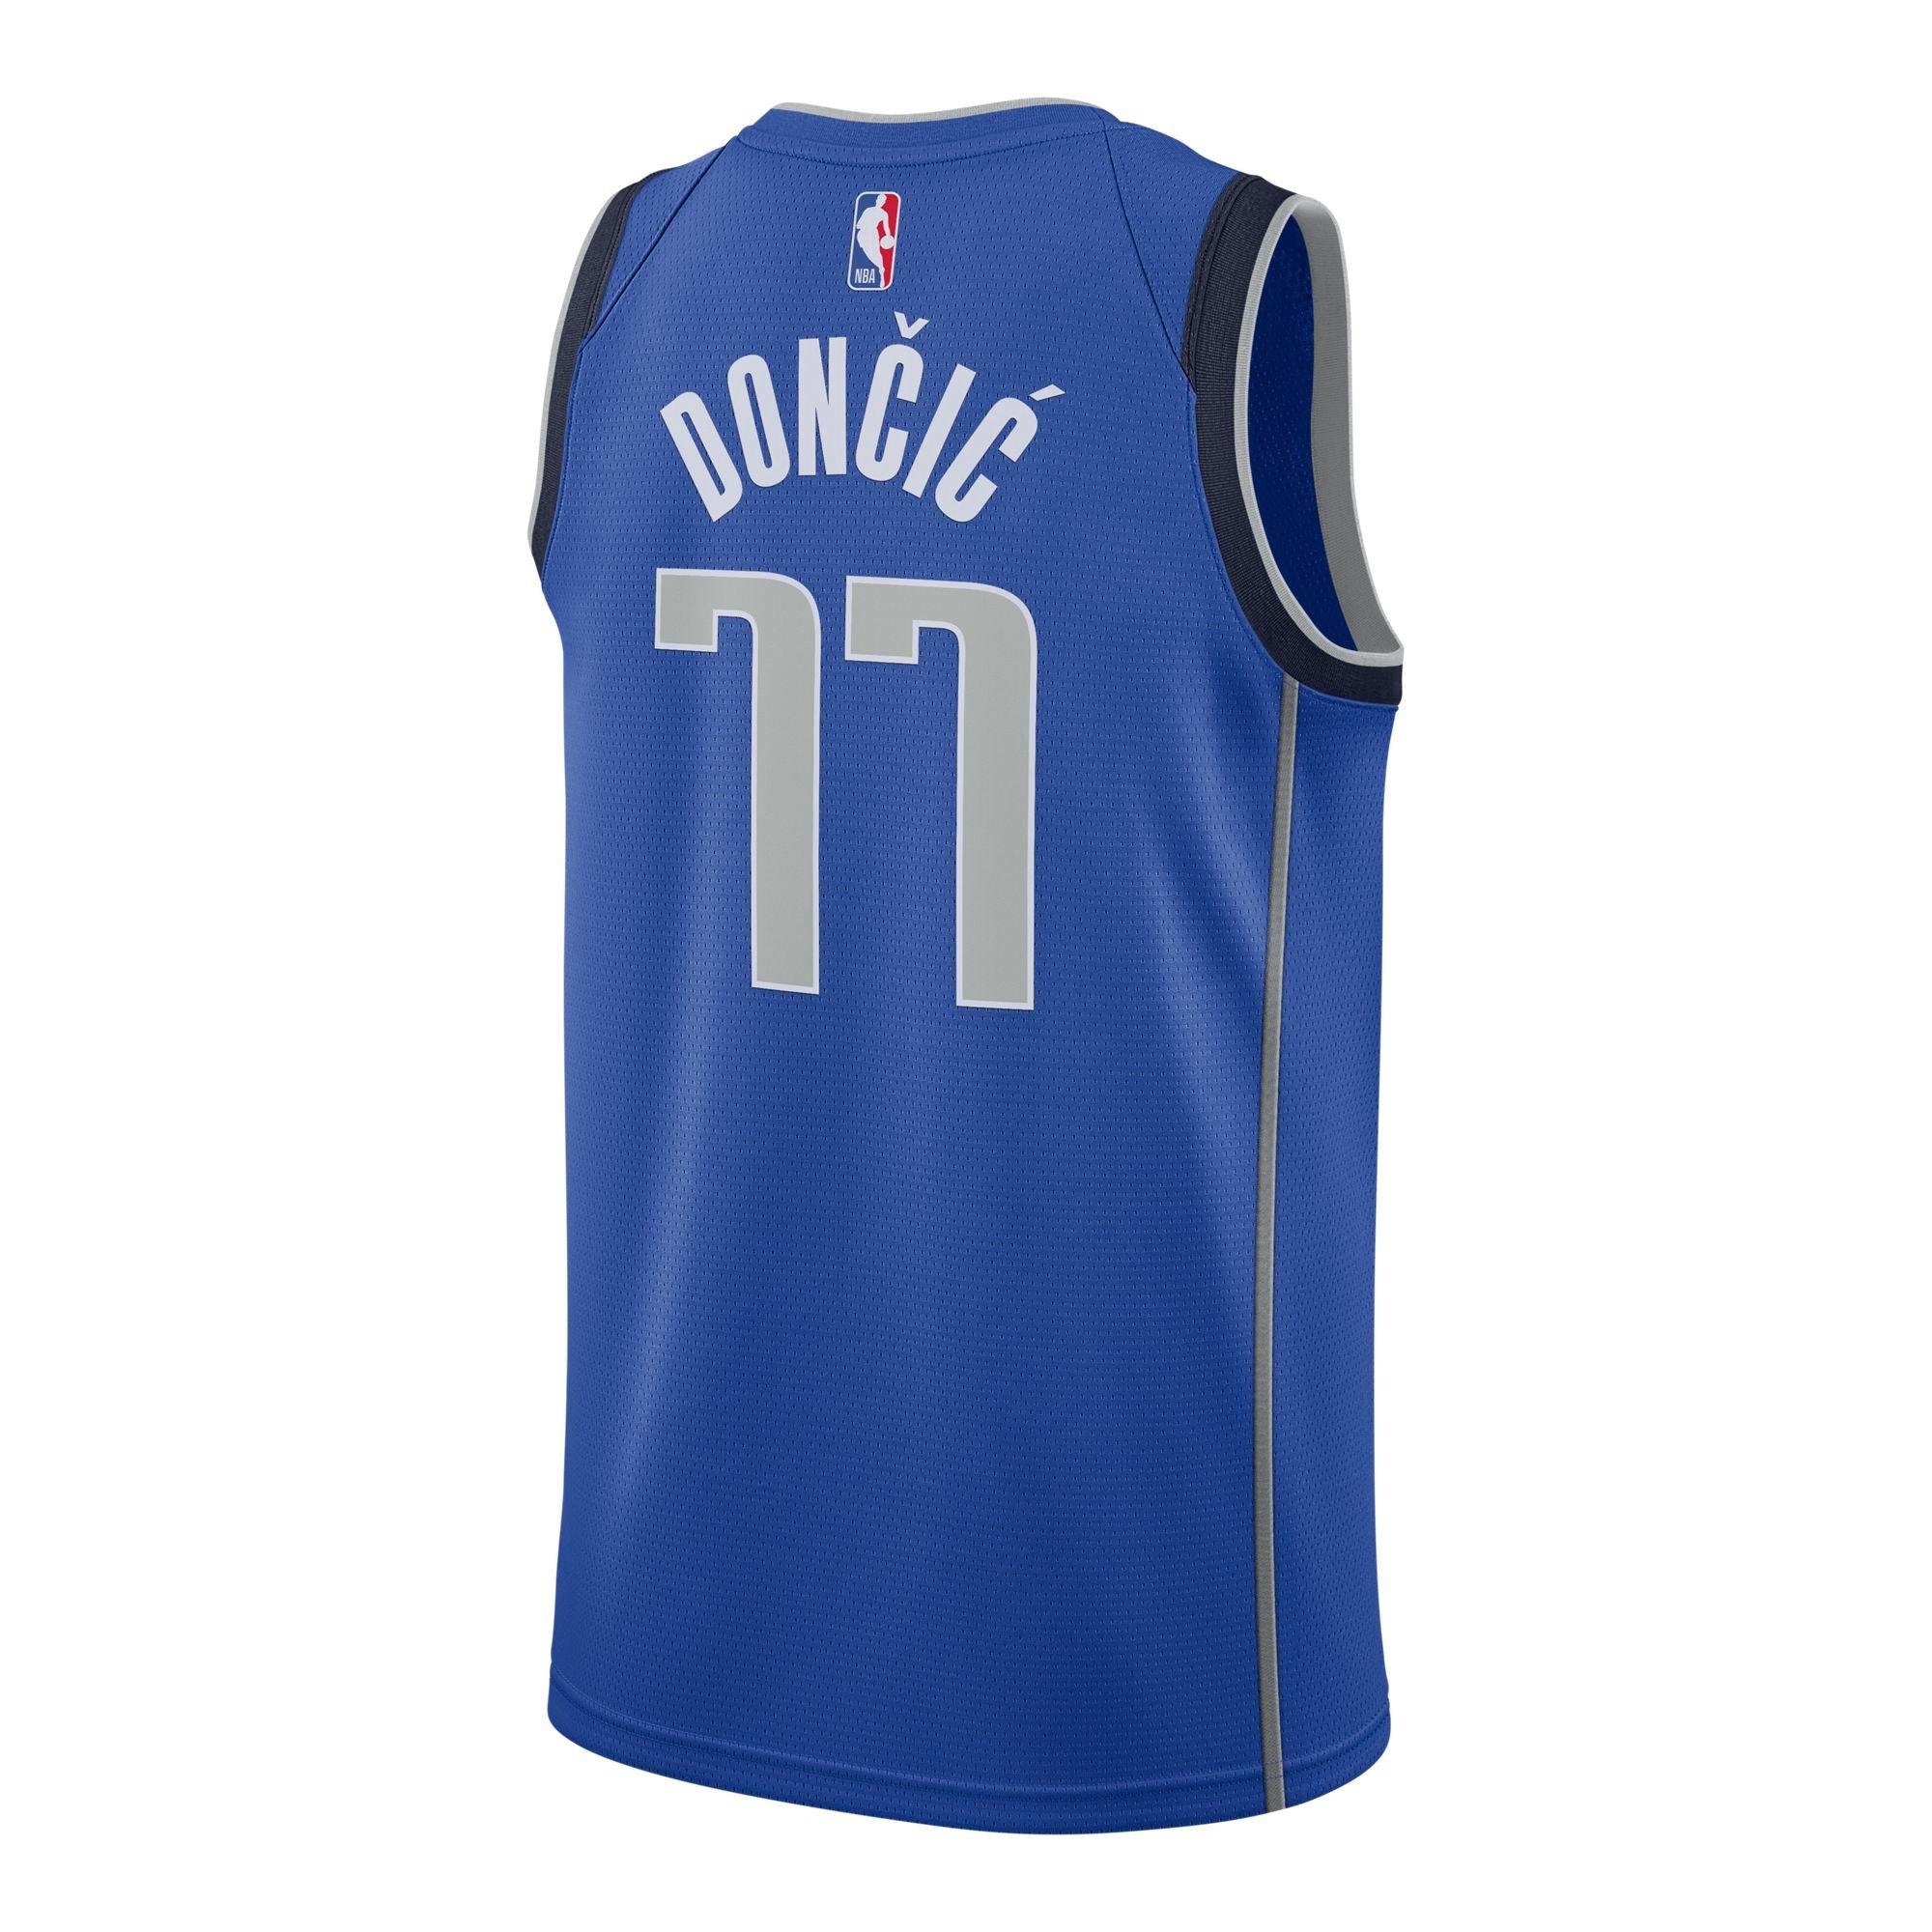 doncic jersey nike